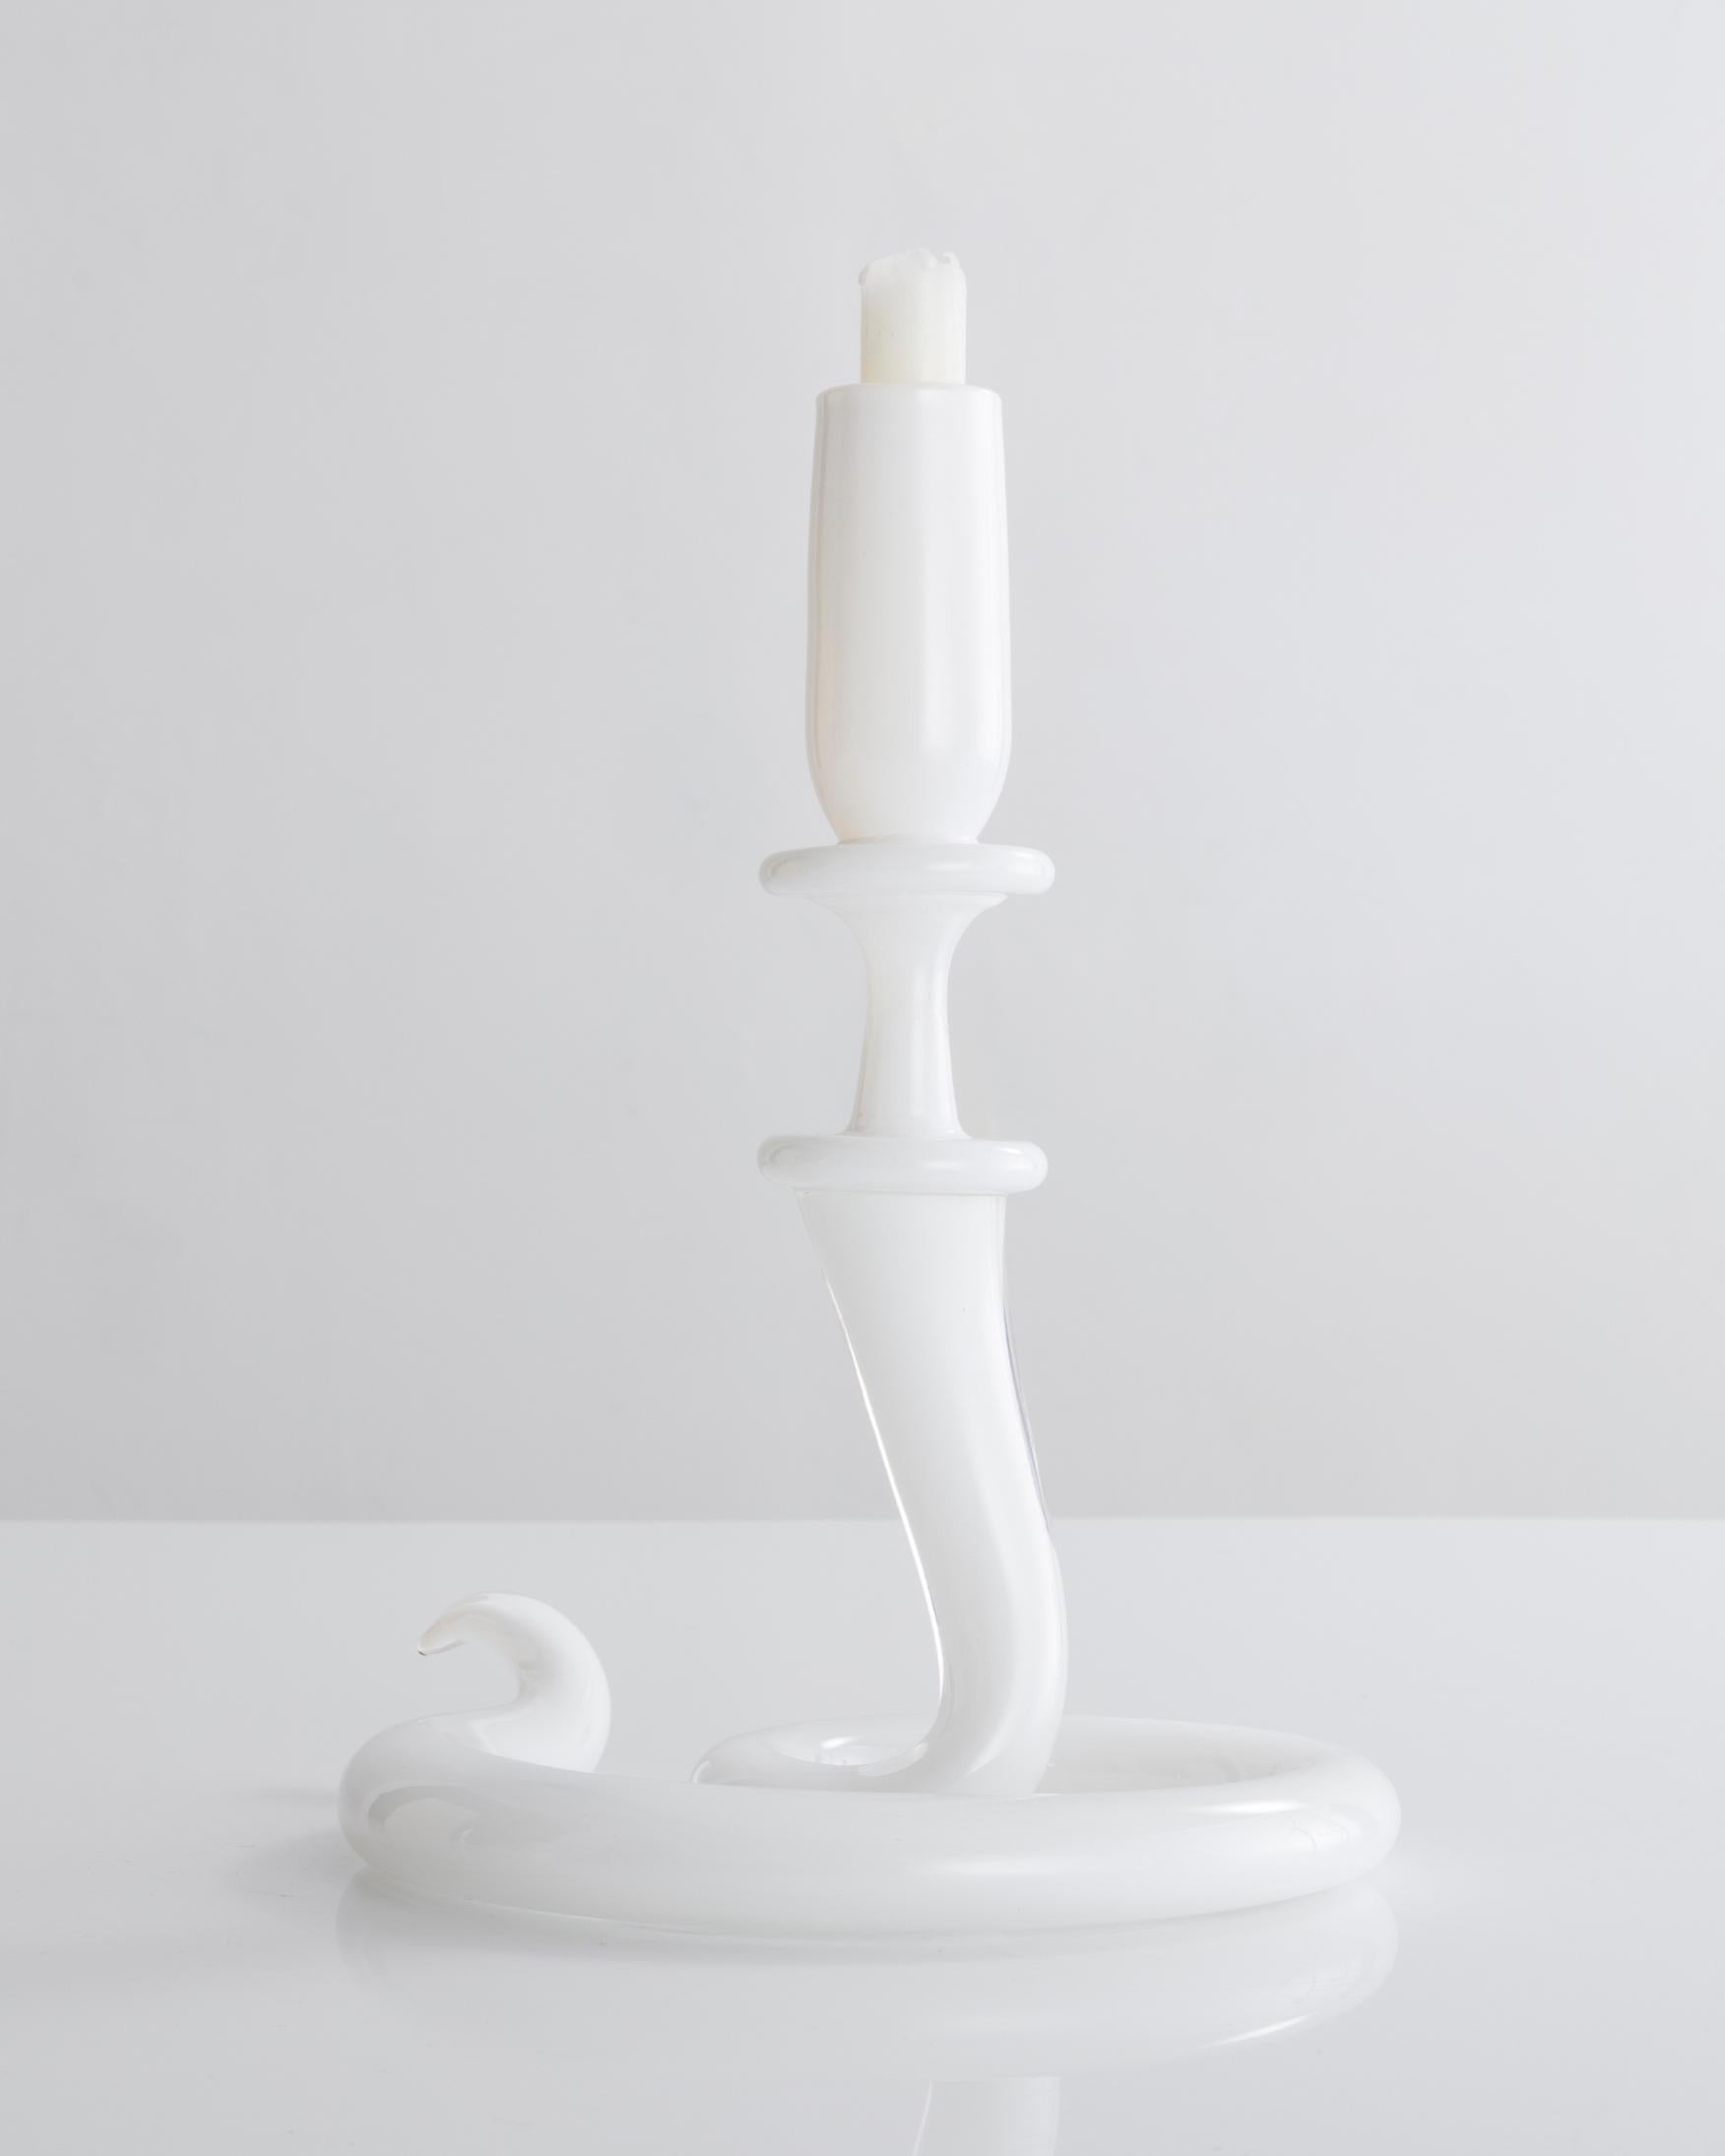 Unique single serpentine light sculpture in white hand blown glass. Designed and made by Jeff Zimmerman, USA, 2017.

Limited number available. Please note that each item may differ slightly in color and shape.